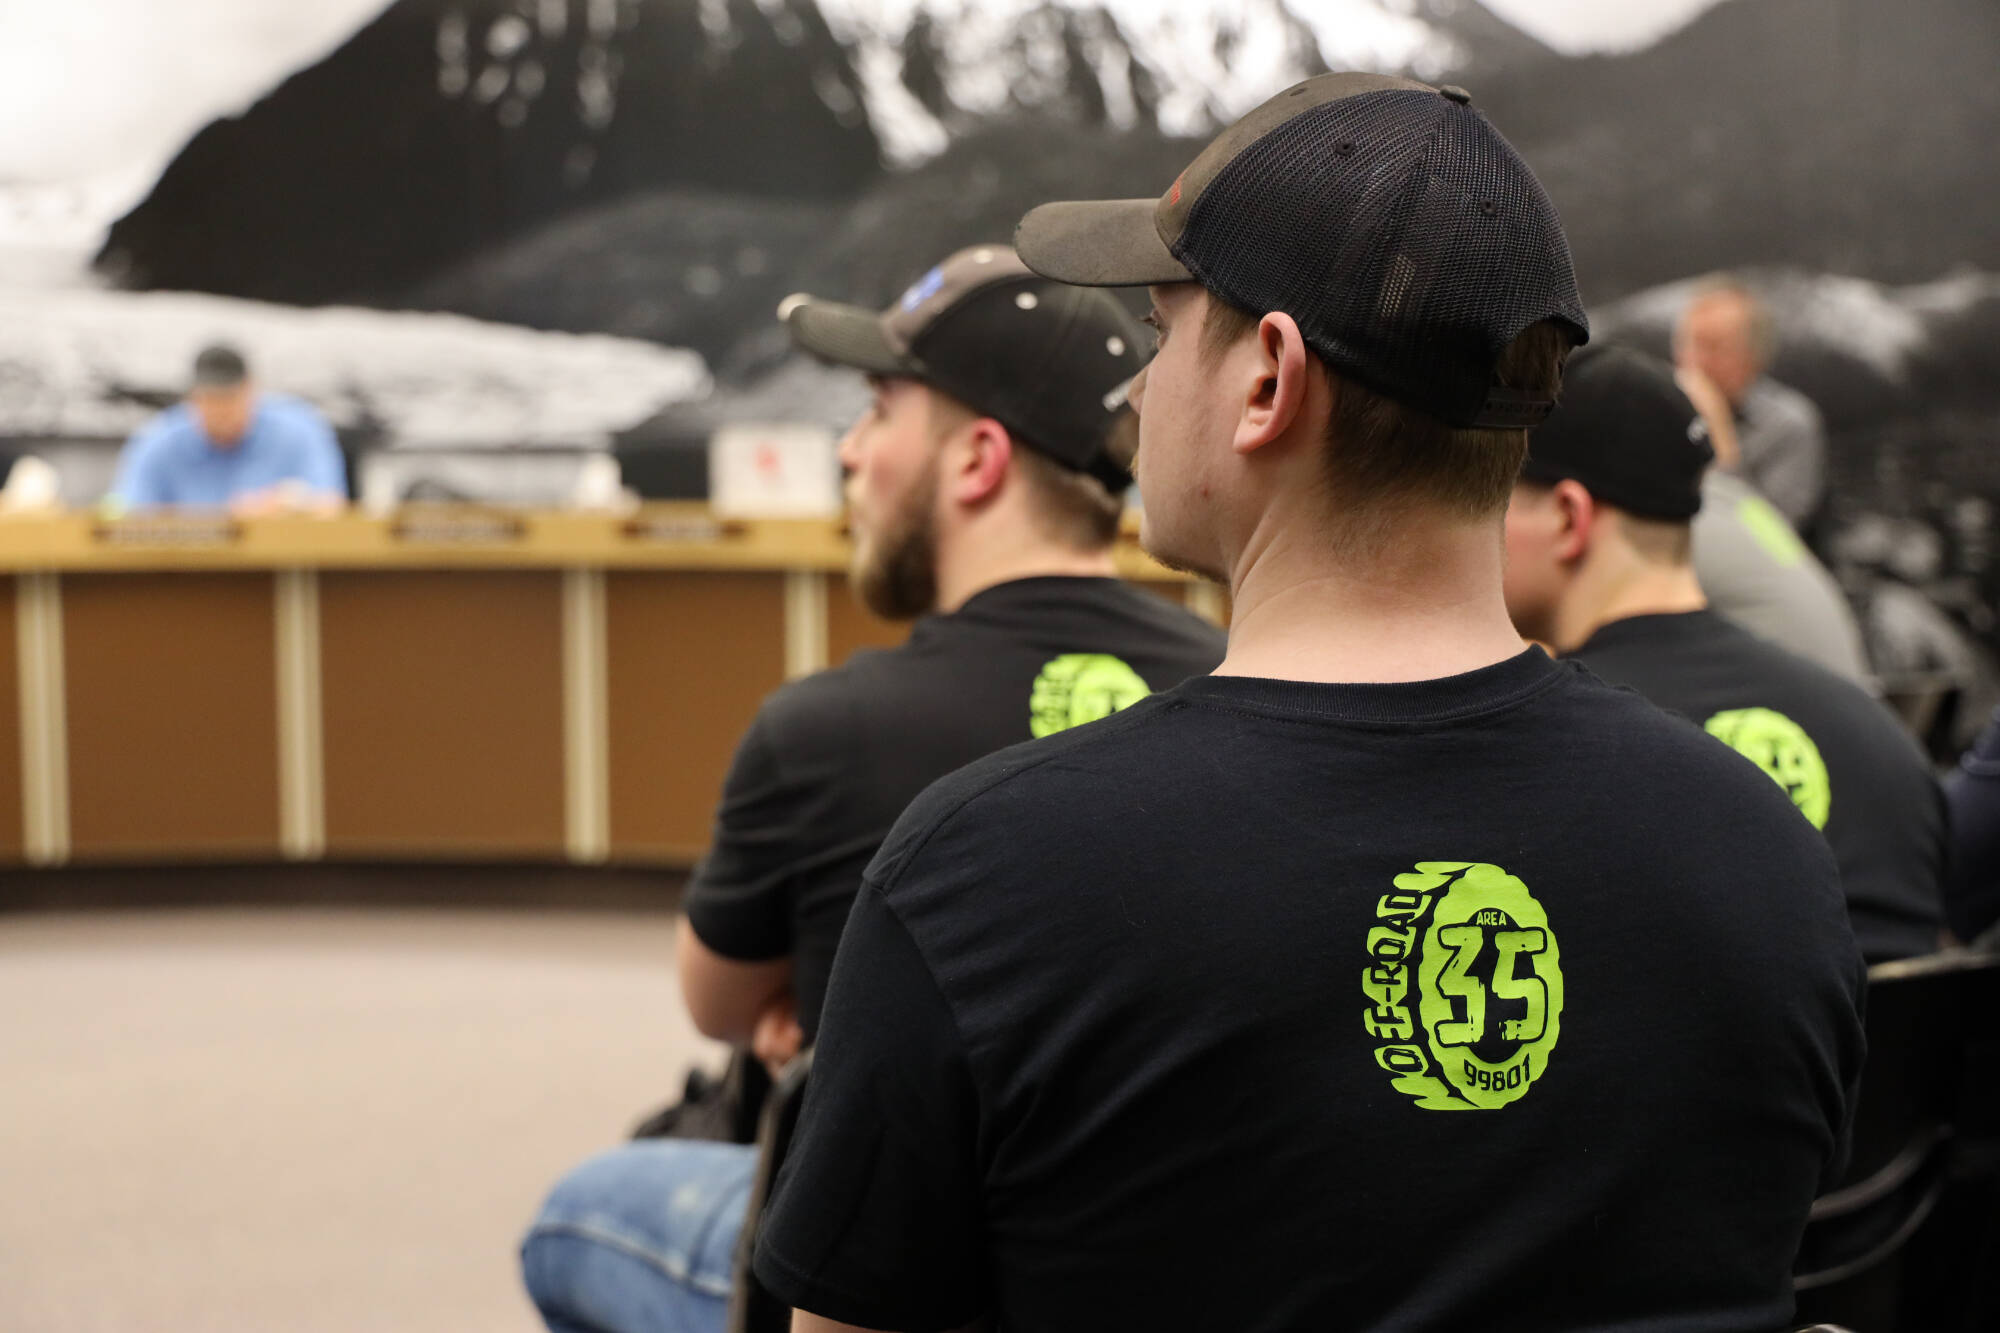 Residents wear matching shirts in advocacy for the proposed off-road vehicle riding park at 35 Mile which was up for permit consideration and later approved at the Tuesday evening planning commission meeting. ( Clarise Larson / Juneau Empire)